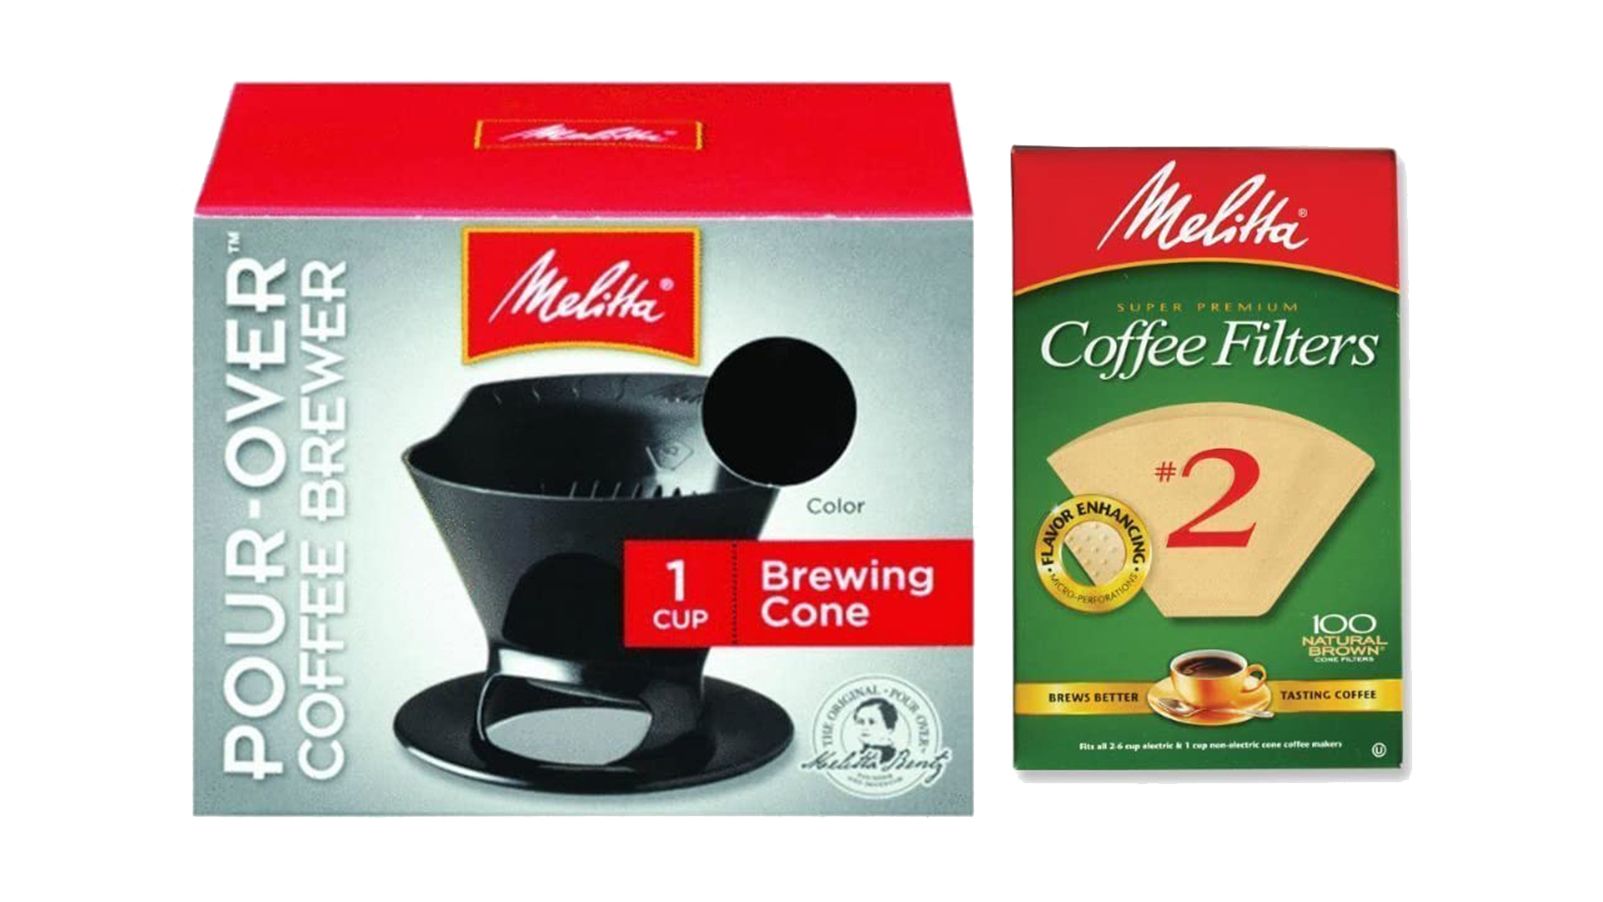 Melitta Coffee Maker, Single Cup Pour-Over Brewer with Travel Mug, Black, 2 Pack